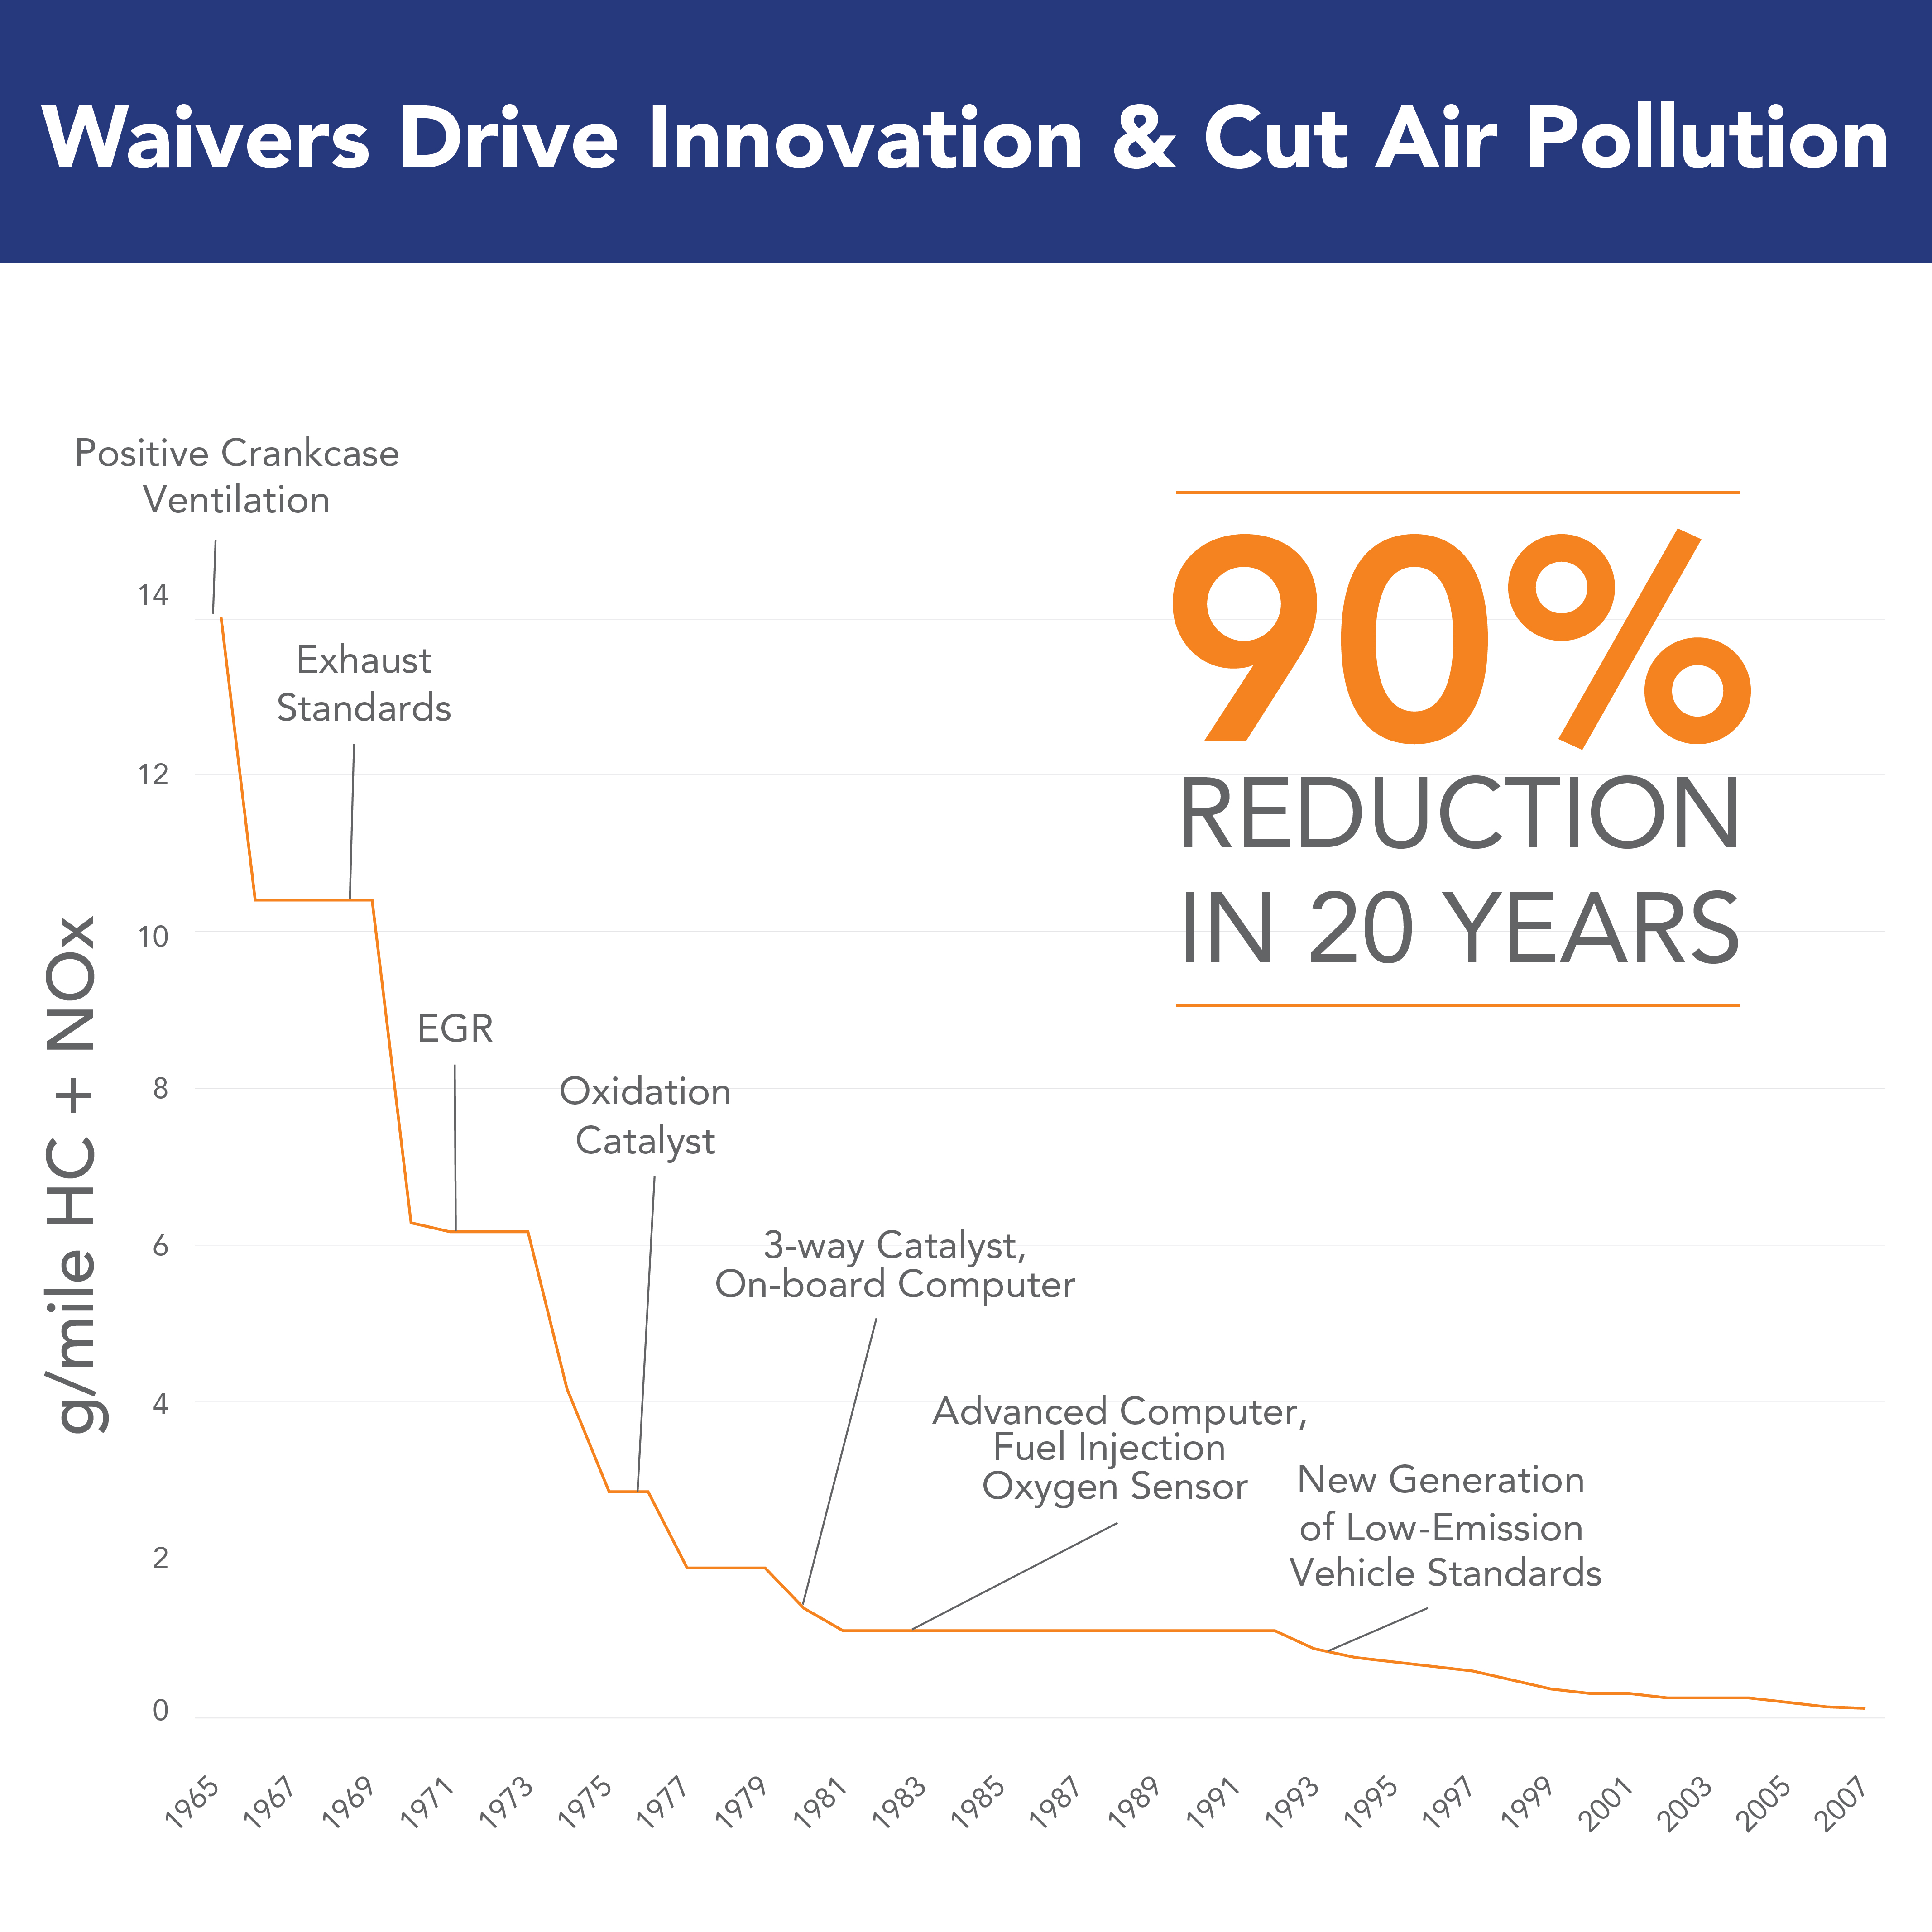 waivers drive innovation & but air pollution